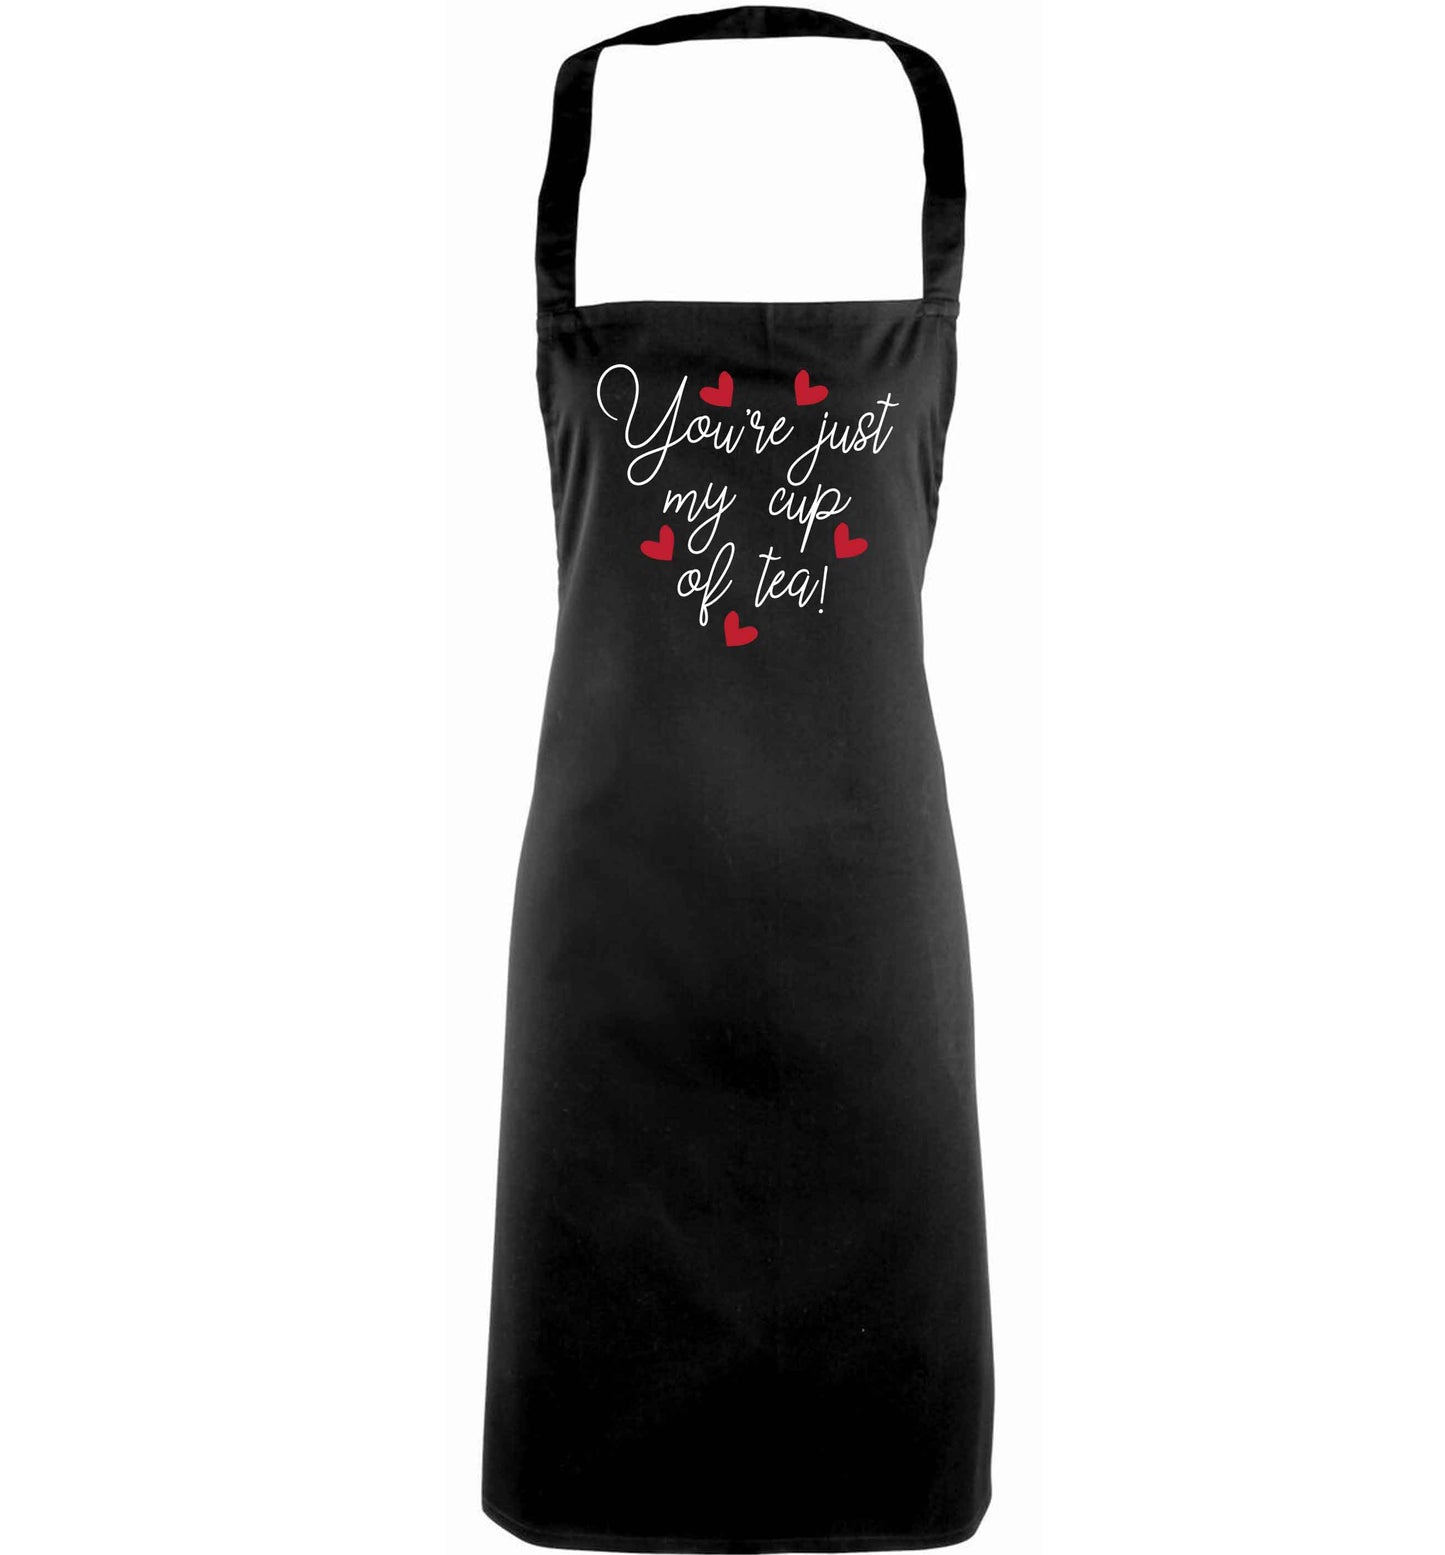 You're just my cup of tea adults black apron